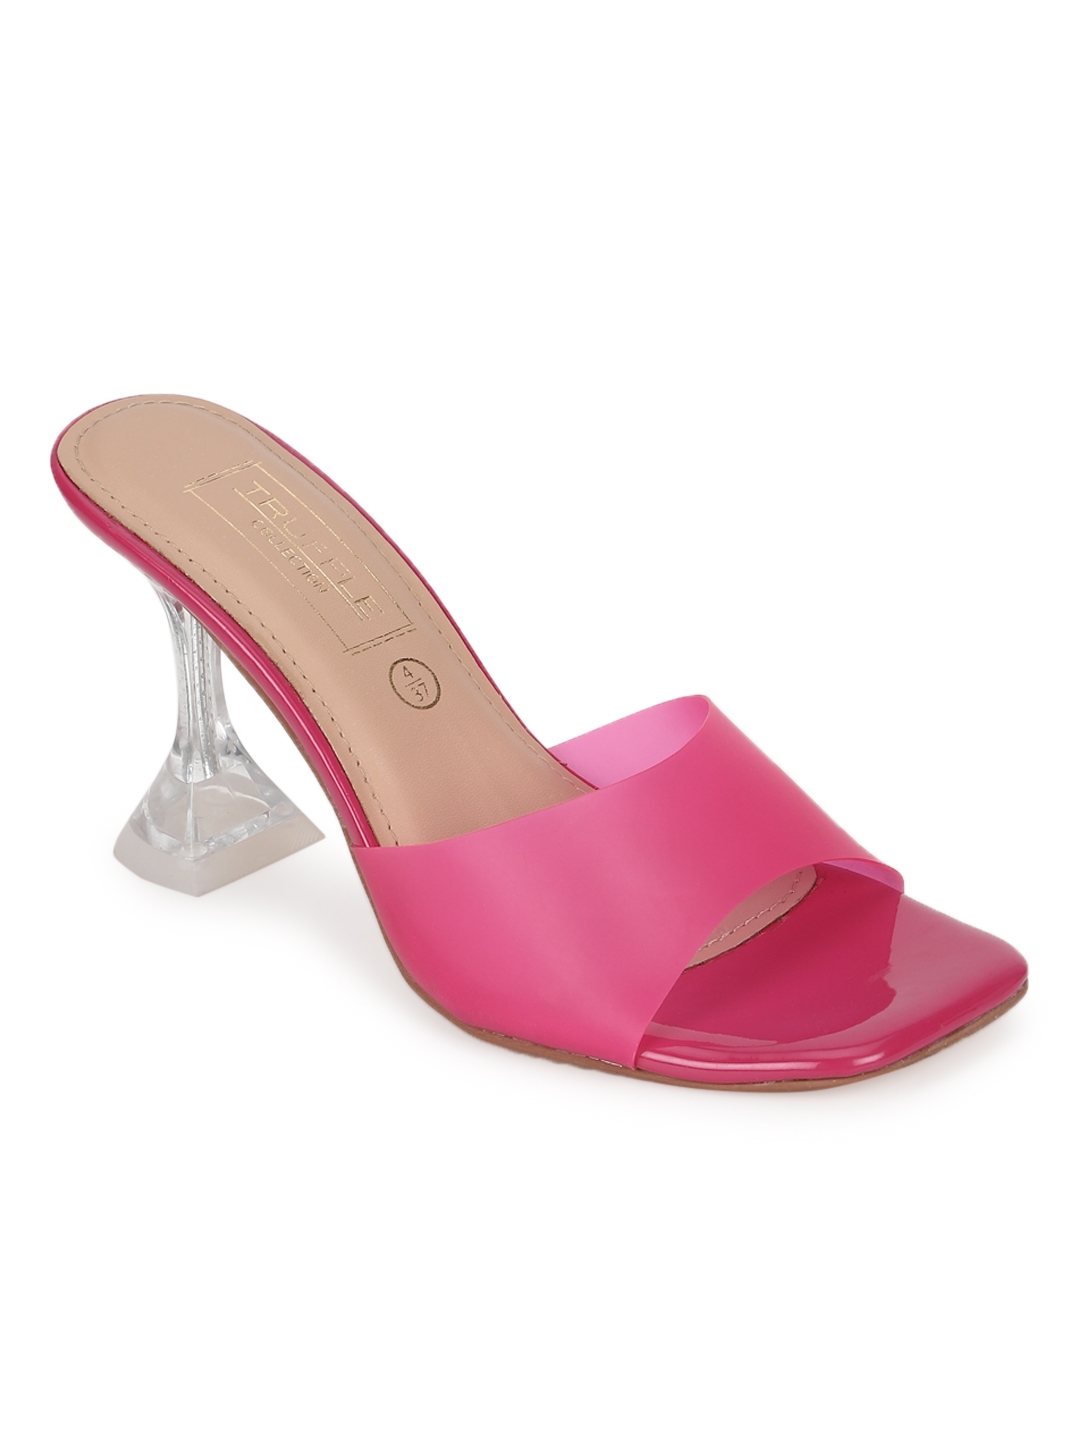 Truffle Collection | Fuschia Pink Patent Perspex Clear Stiletto Mules